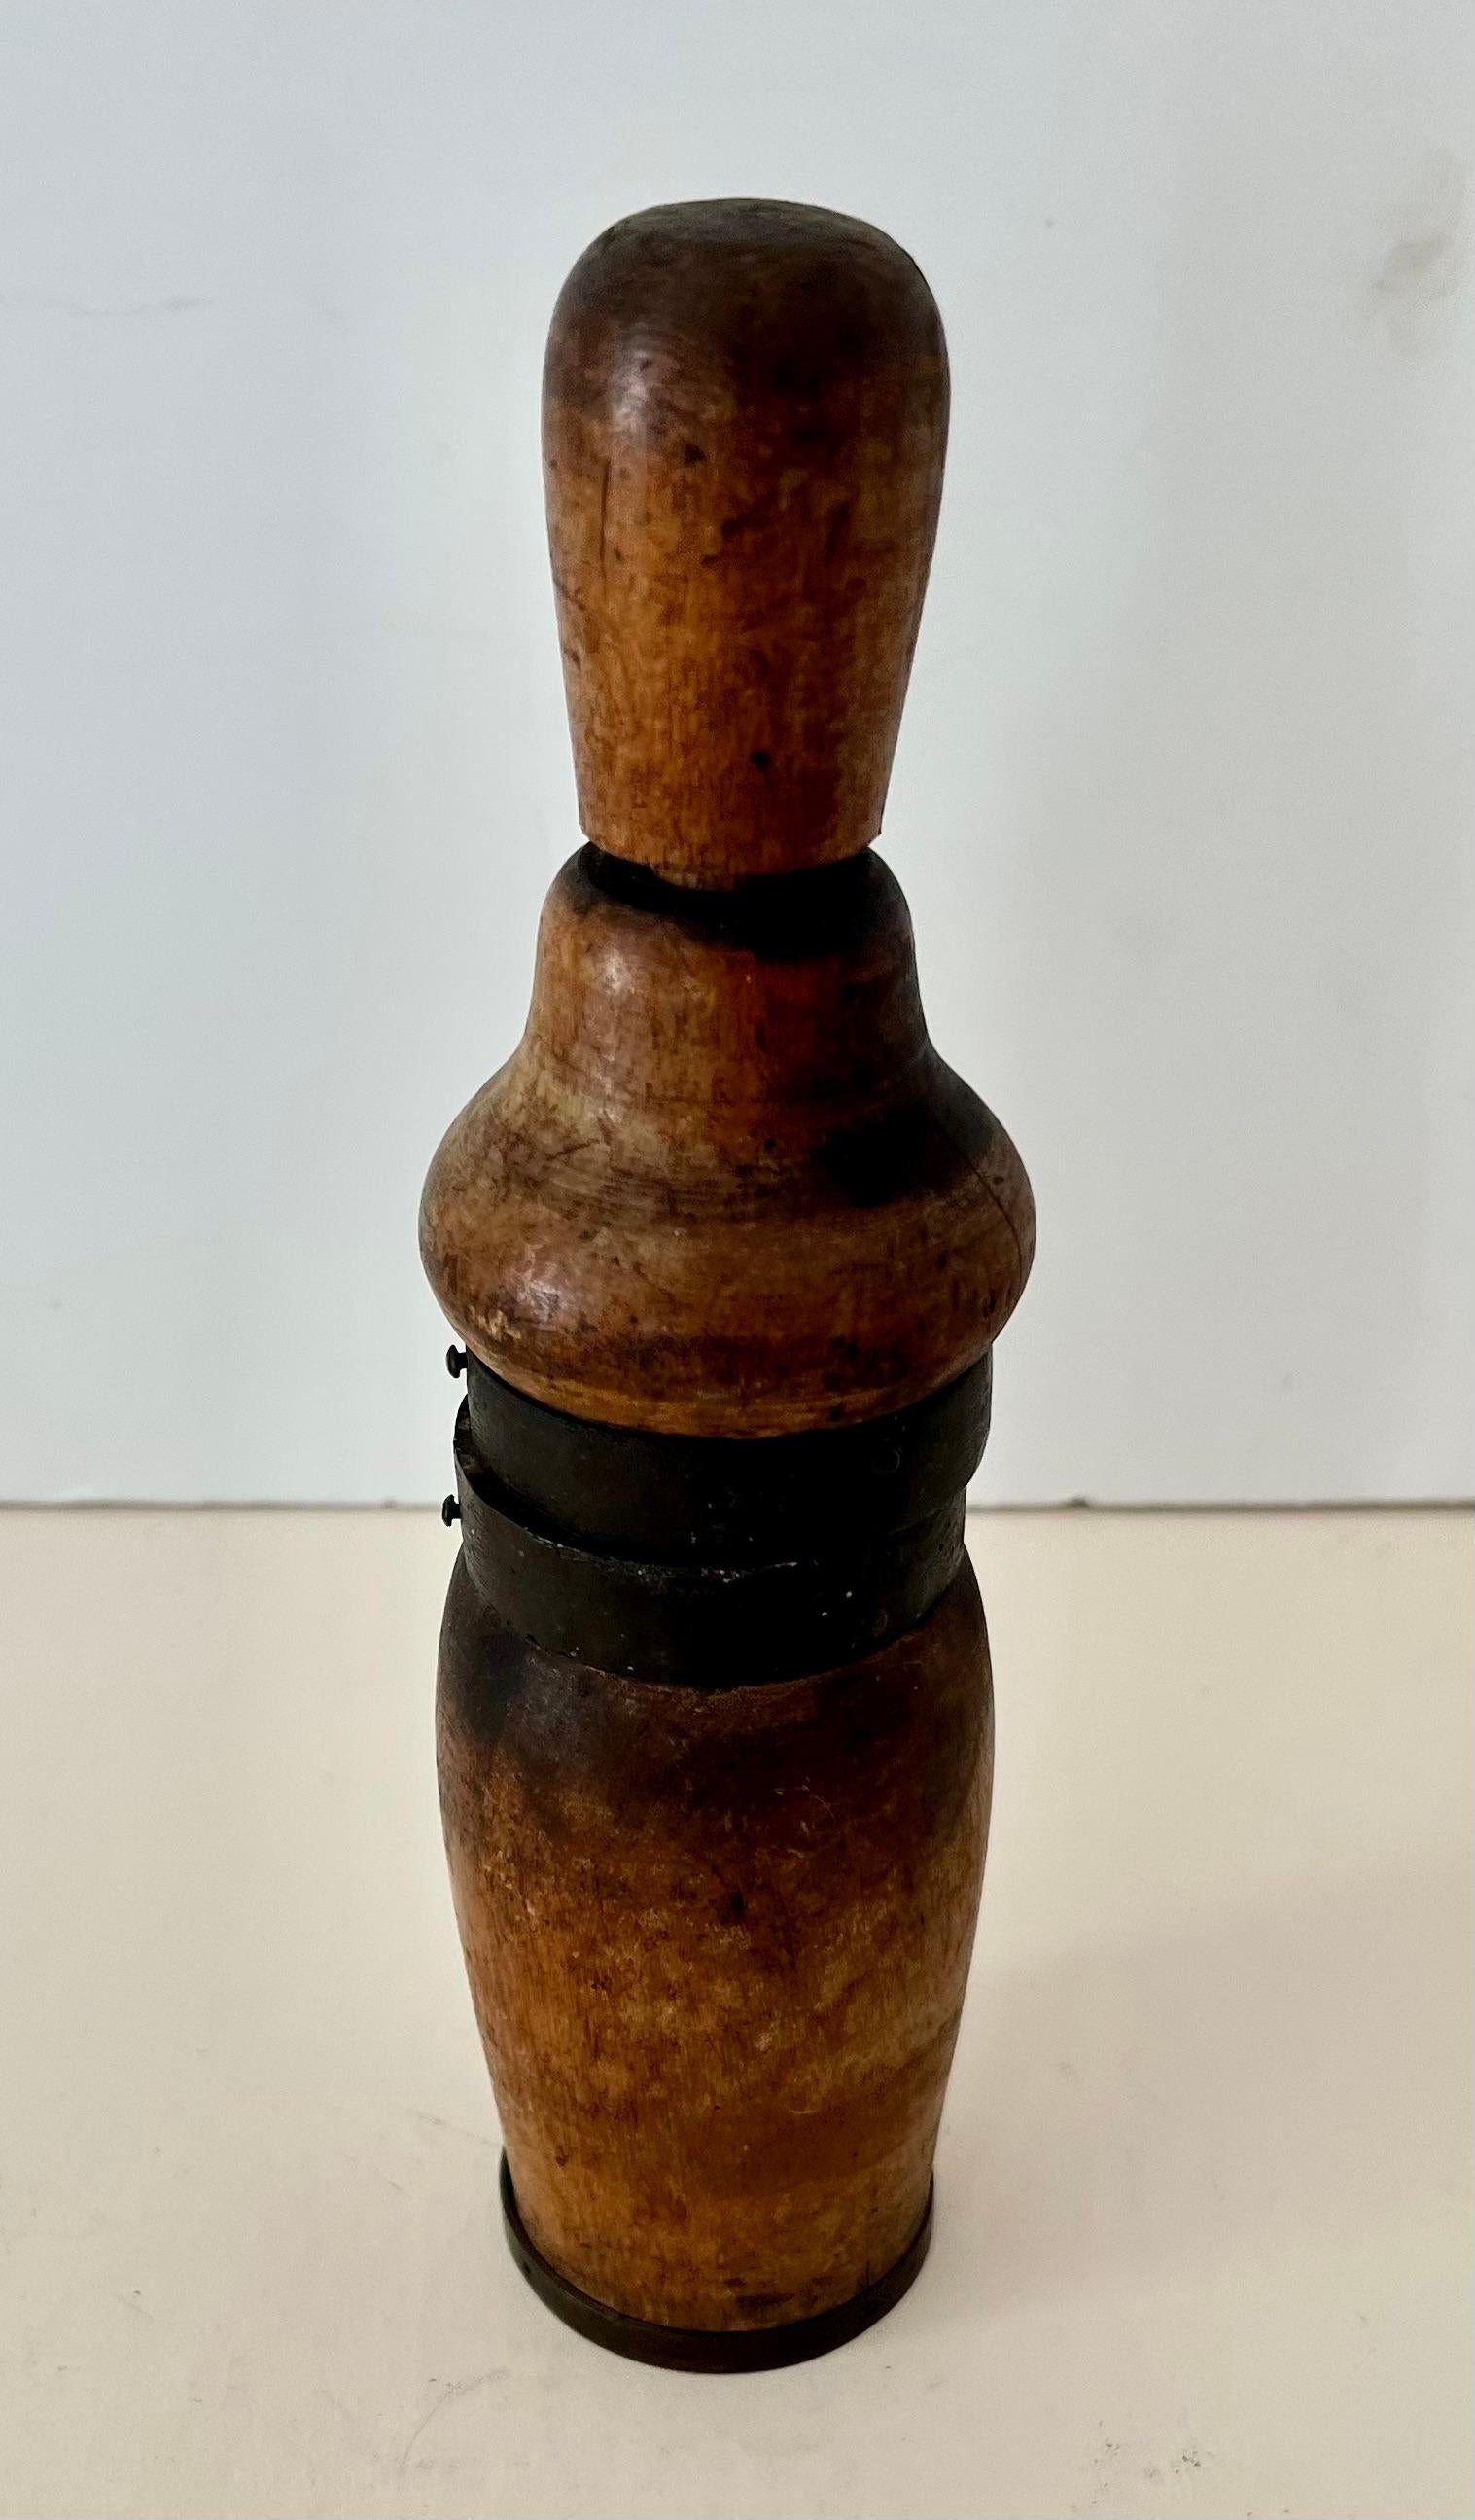 I rarely purchase pieces that I don't know the purpose of, but this piece was purchased with some wine accessories. it's a beautiful piece and while it looks like a pepper mill, it definitely is not.

One theory is one puts their wine cork into